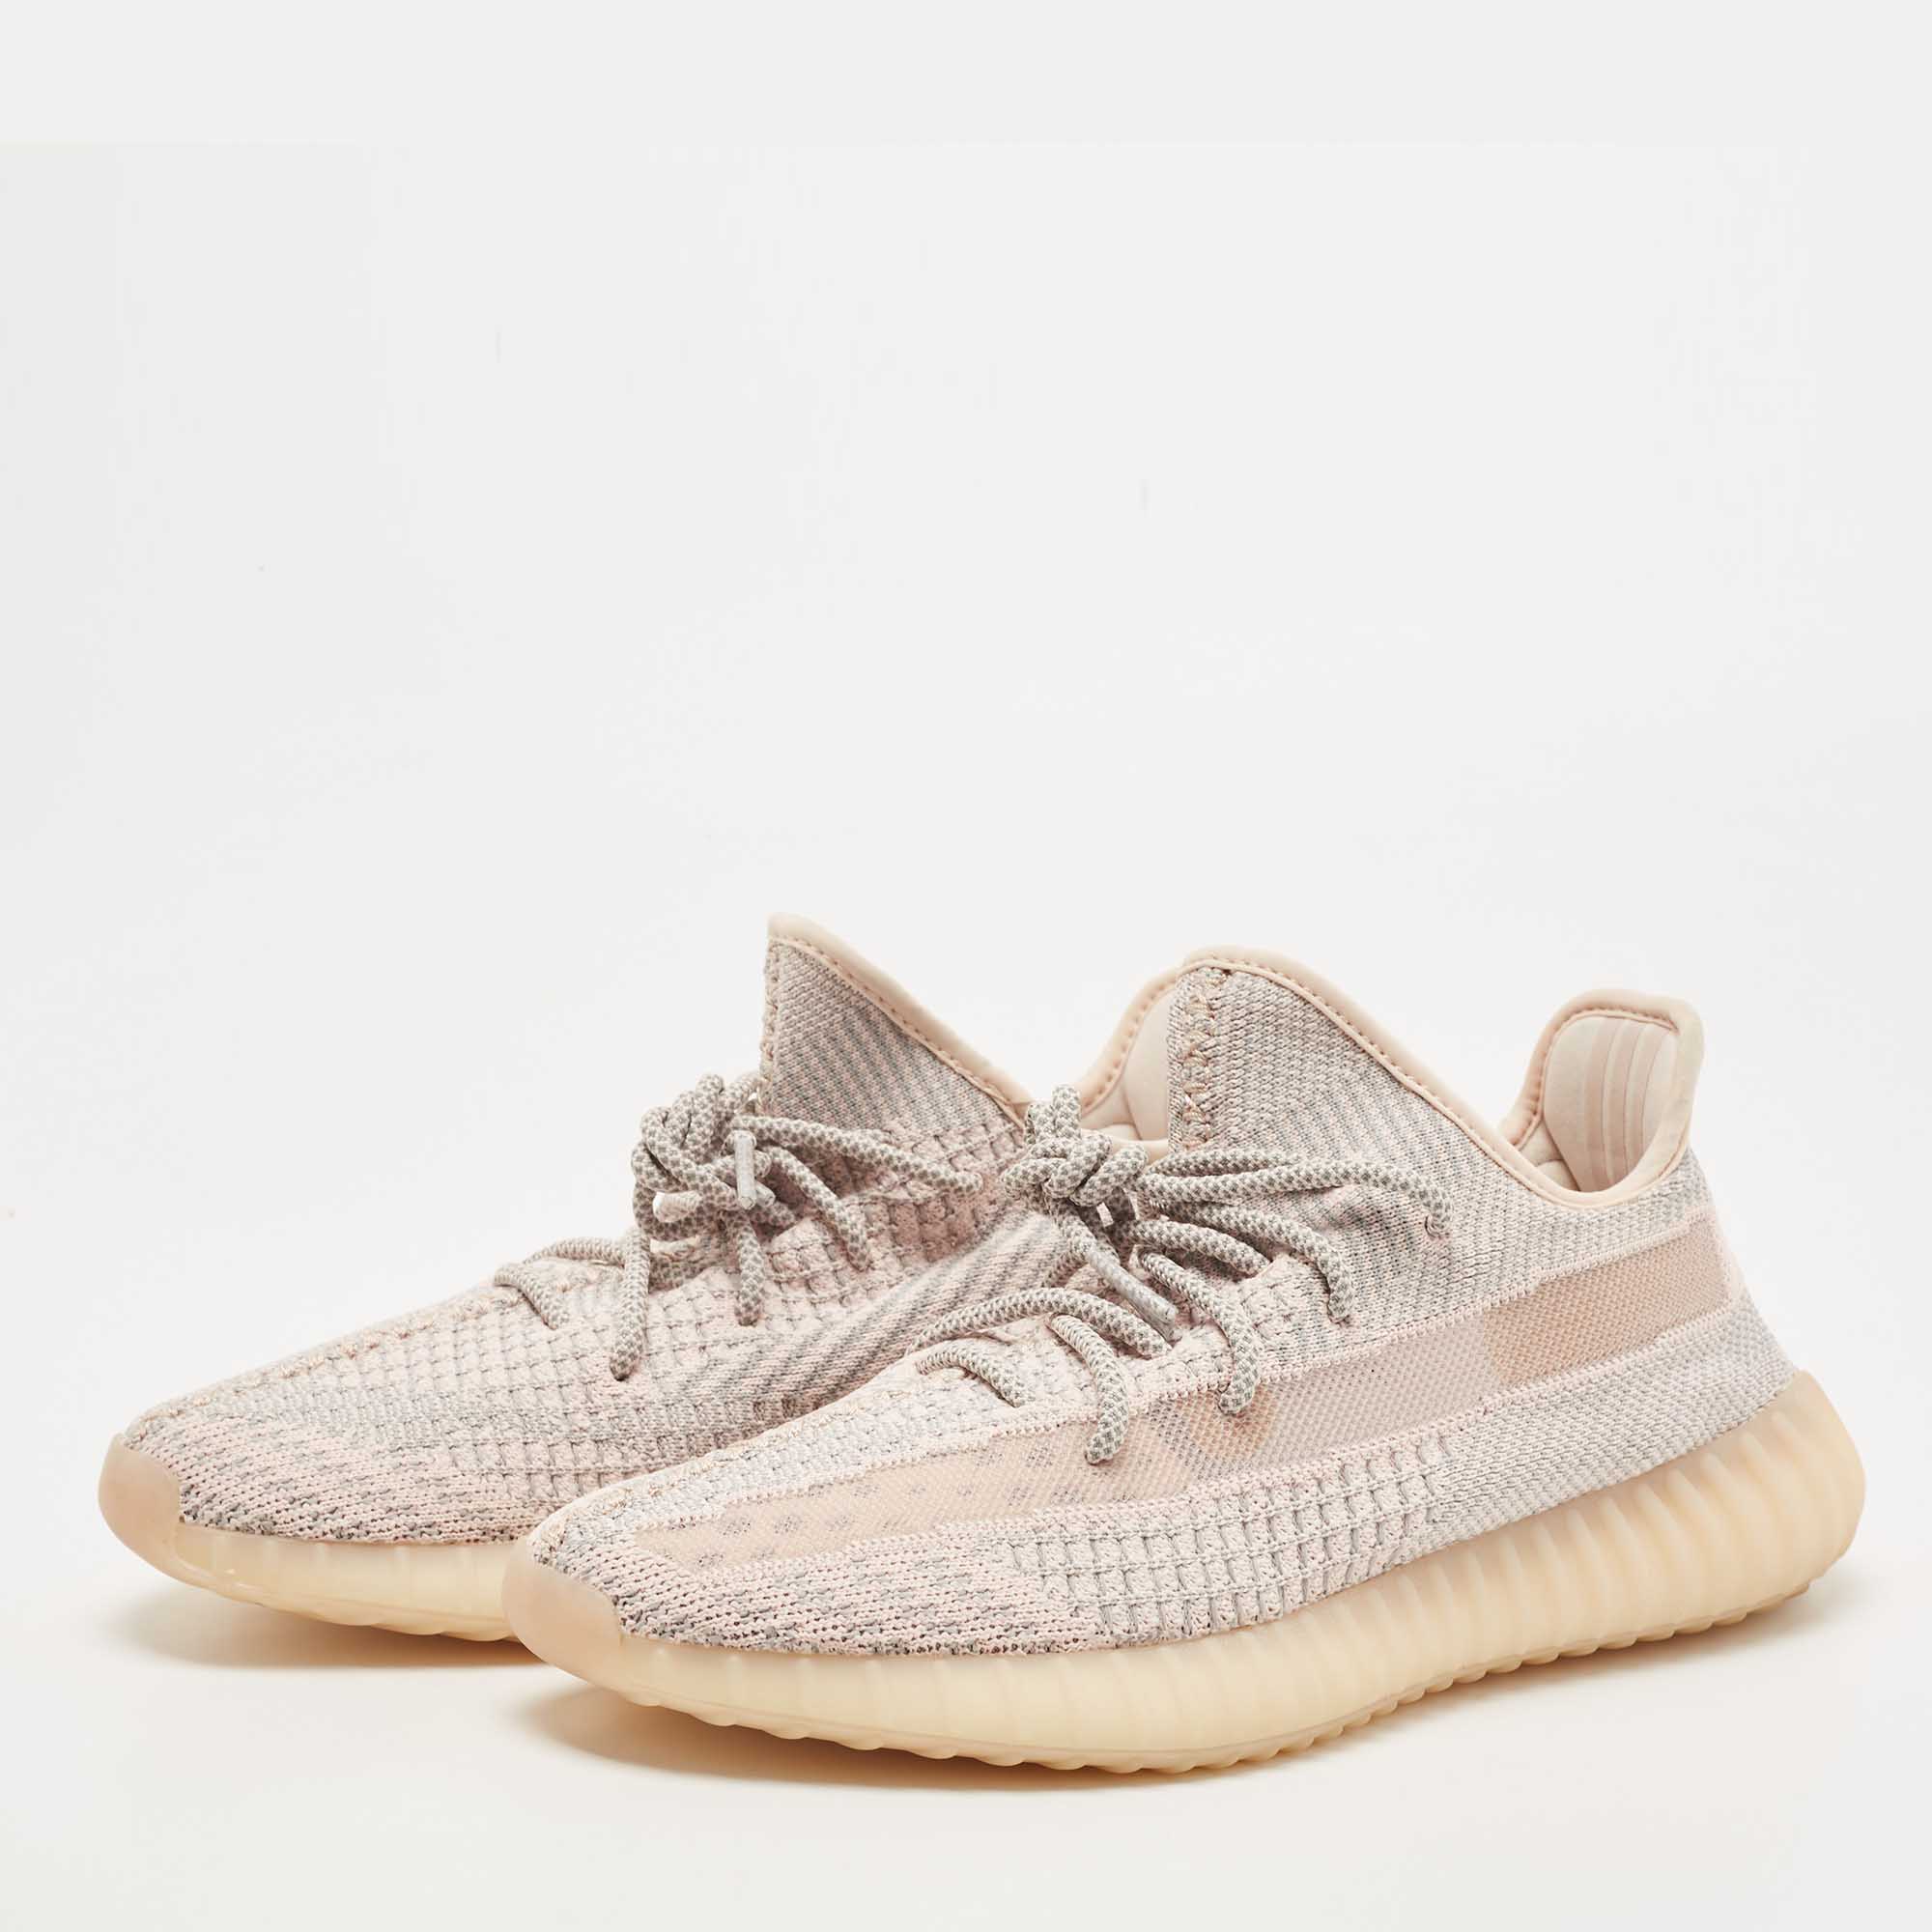 

Yeezy x Adidas Pink Knit Fabric Boost 350 V2 Synth Non Reflective Sneakers Size